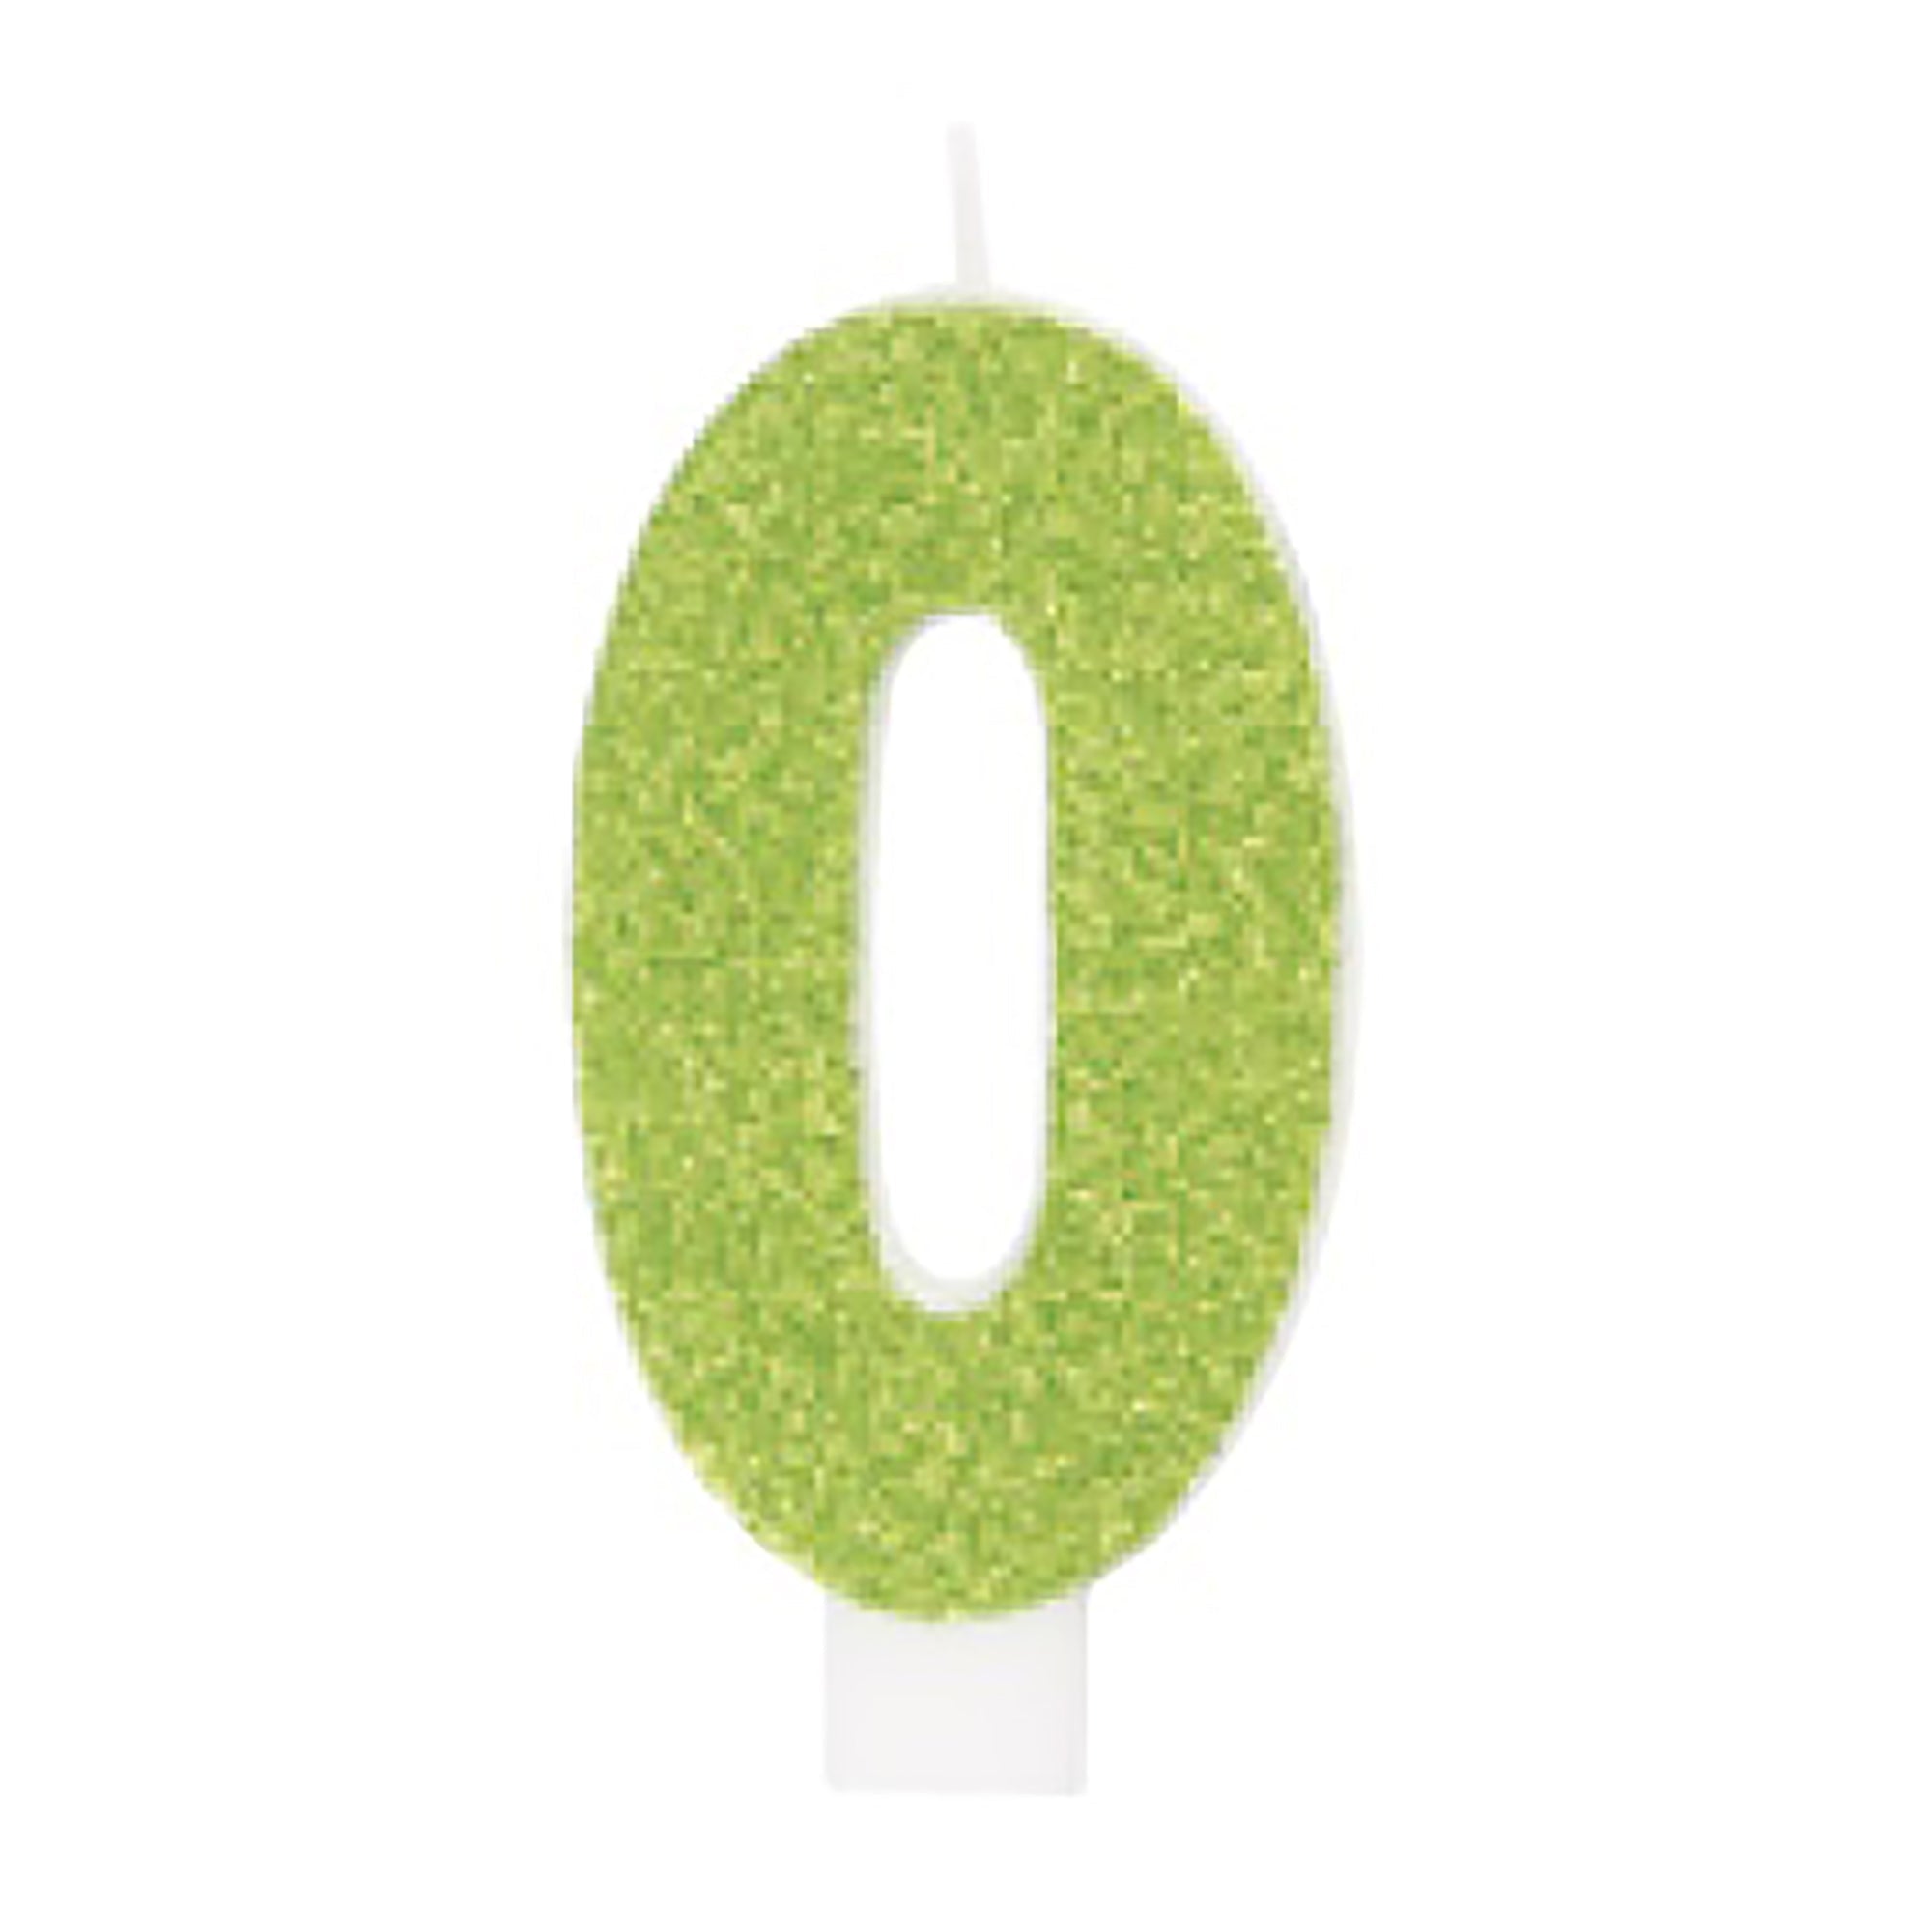 Age 0 Numeral Candle Printed One Side Glitter Red or Blue or Green or Gold 3.25in